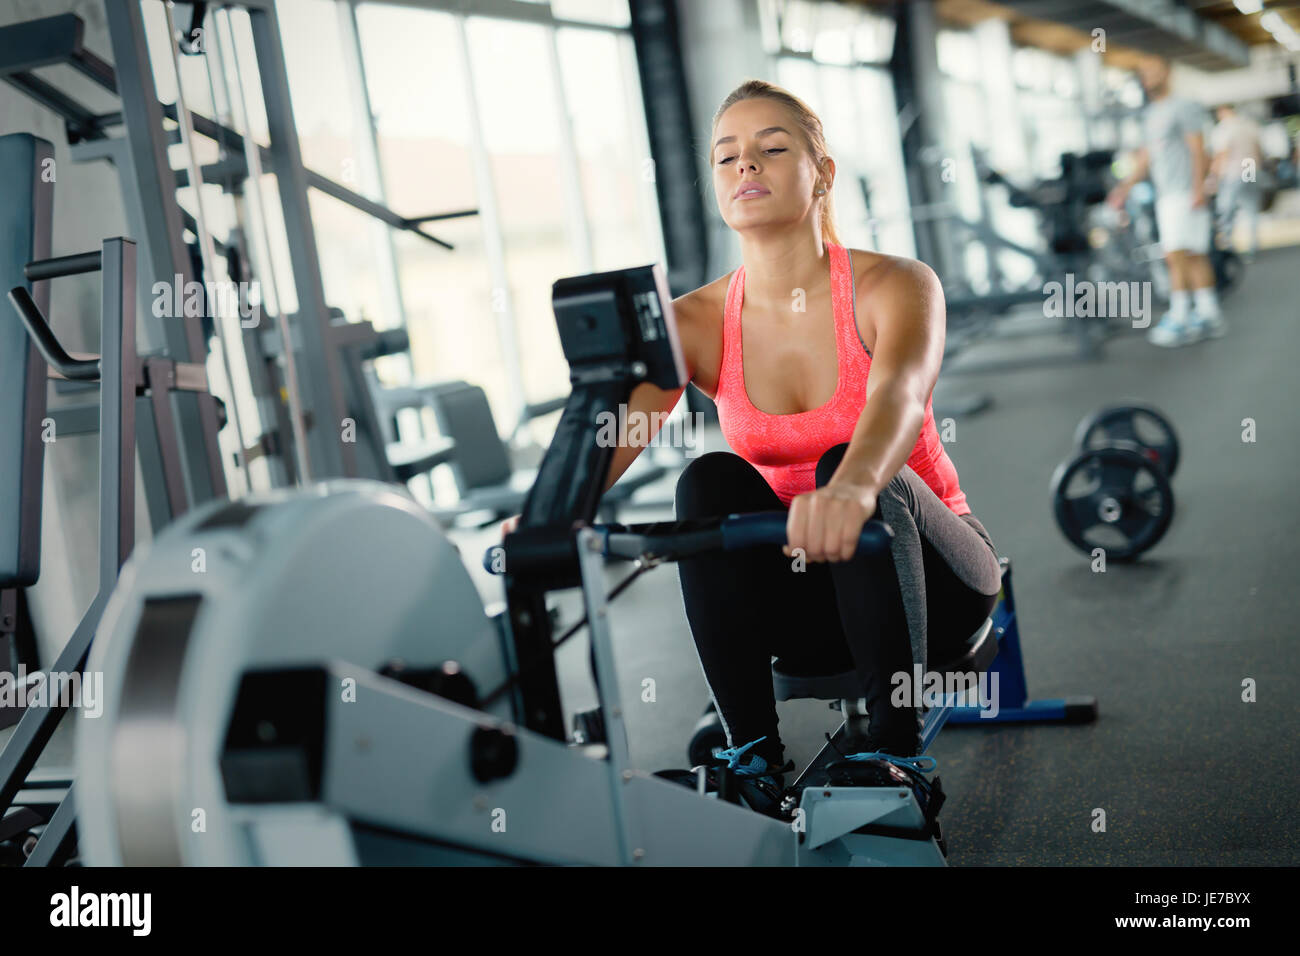 Young cute woman doing exercises with rowing machine Stock Photo